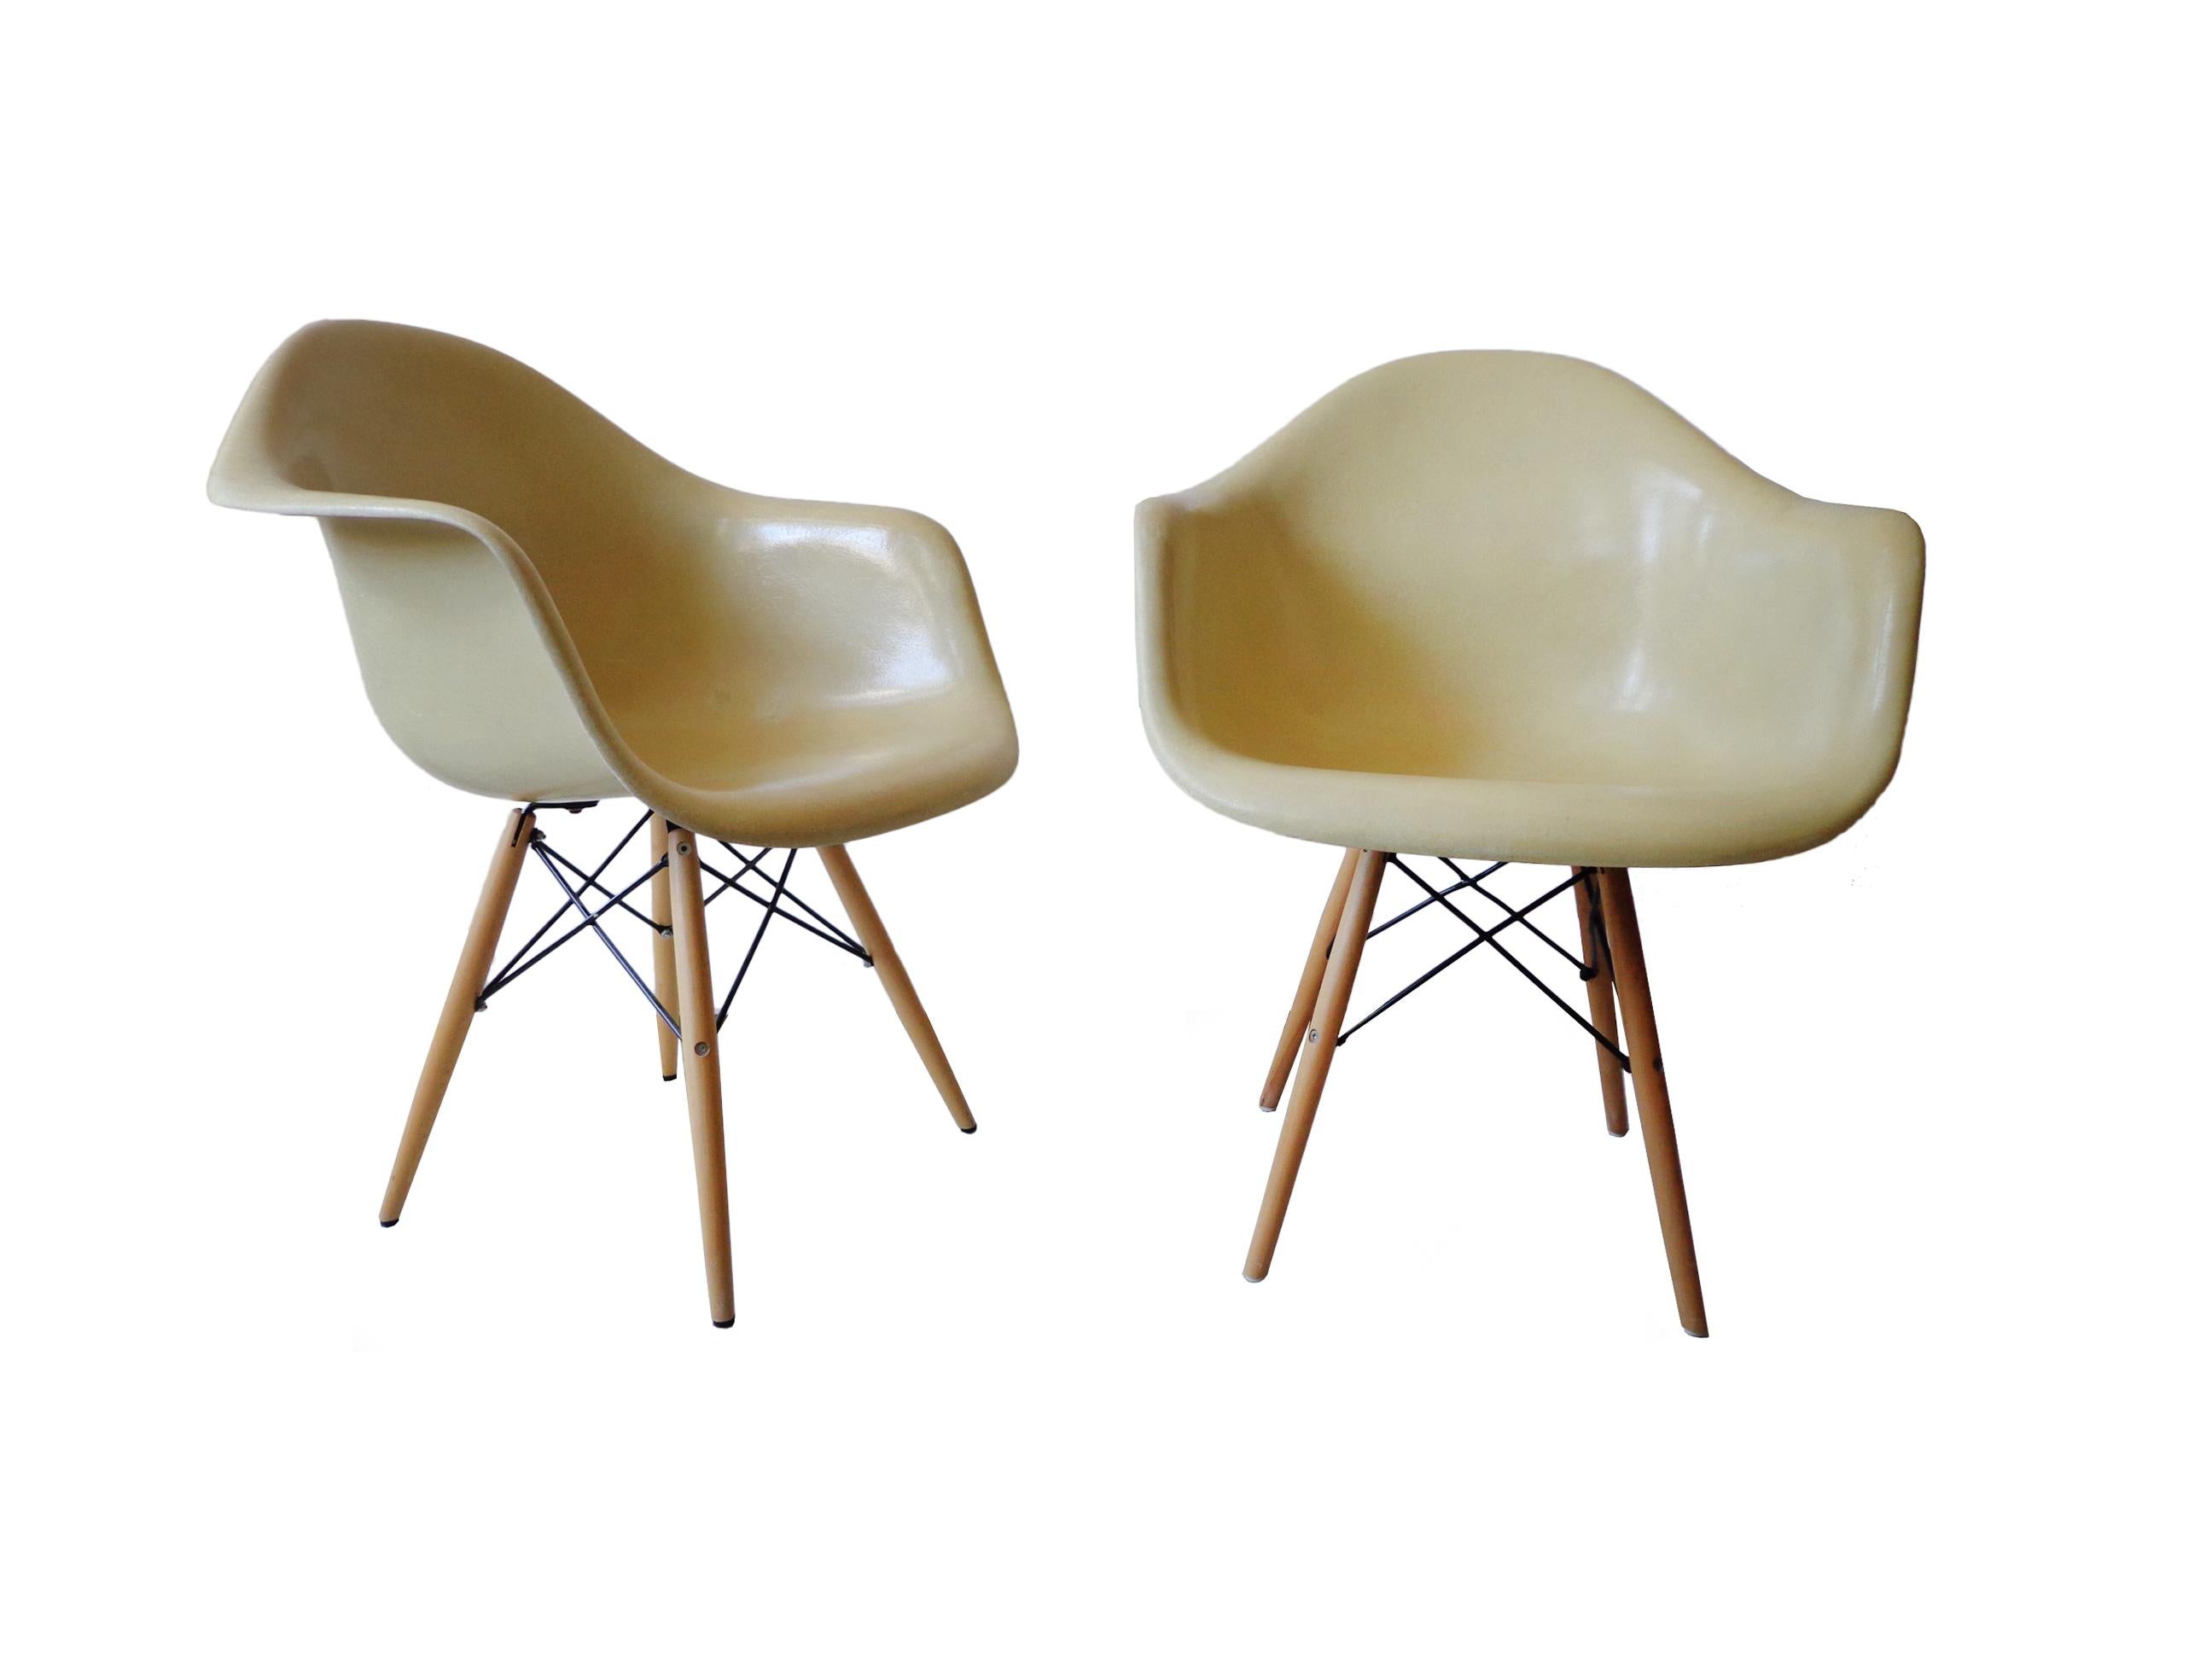 Mid-Century Modern Charles Eames Herman Miller Fiberglass Dining Chairs, 1960s In Good Condition For Sale In Amsterdam, NL